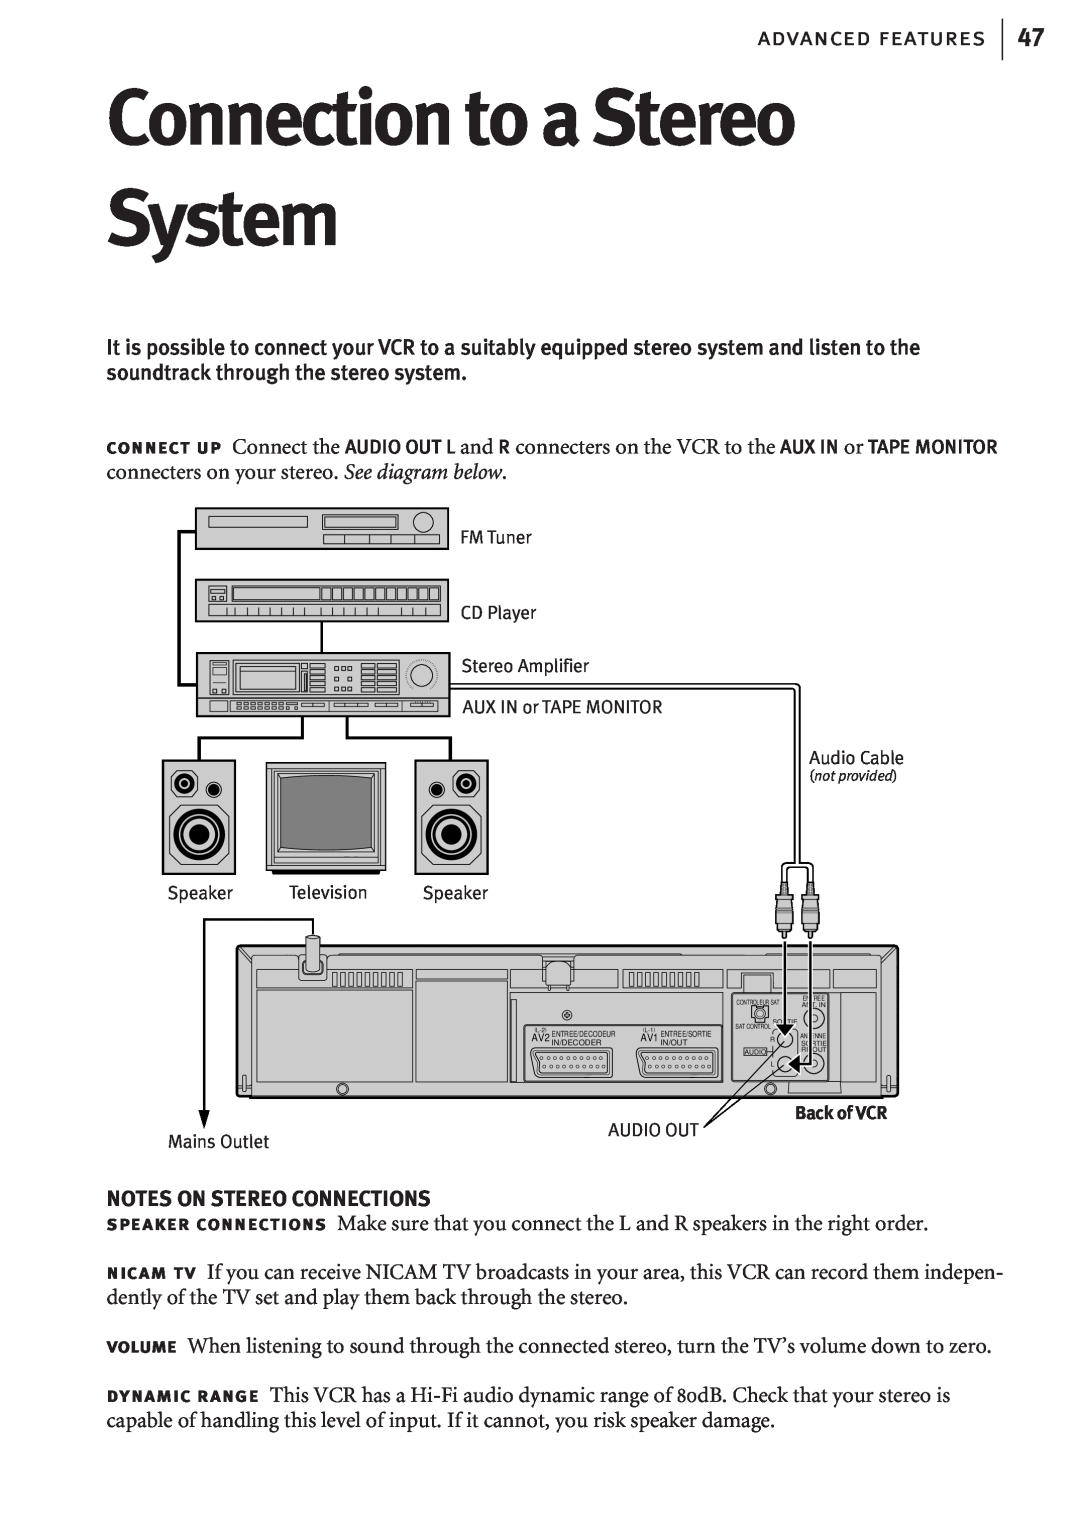 JVC HR-J680EK, HR-J682EK manual Connection to a Stereo System, advanced features, Notes On Stereo Connections 